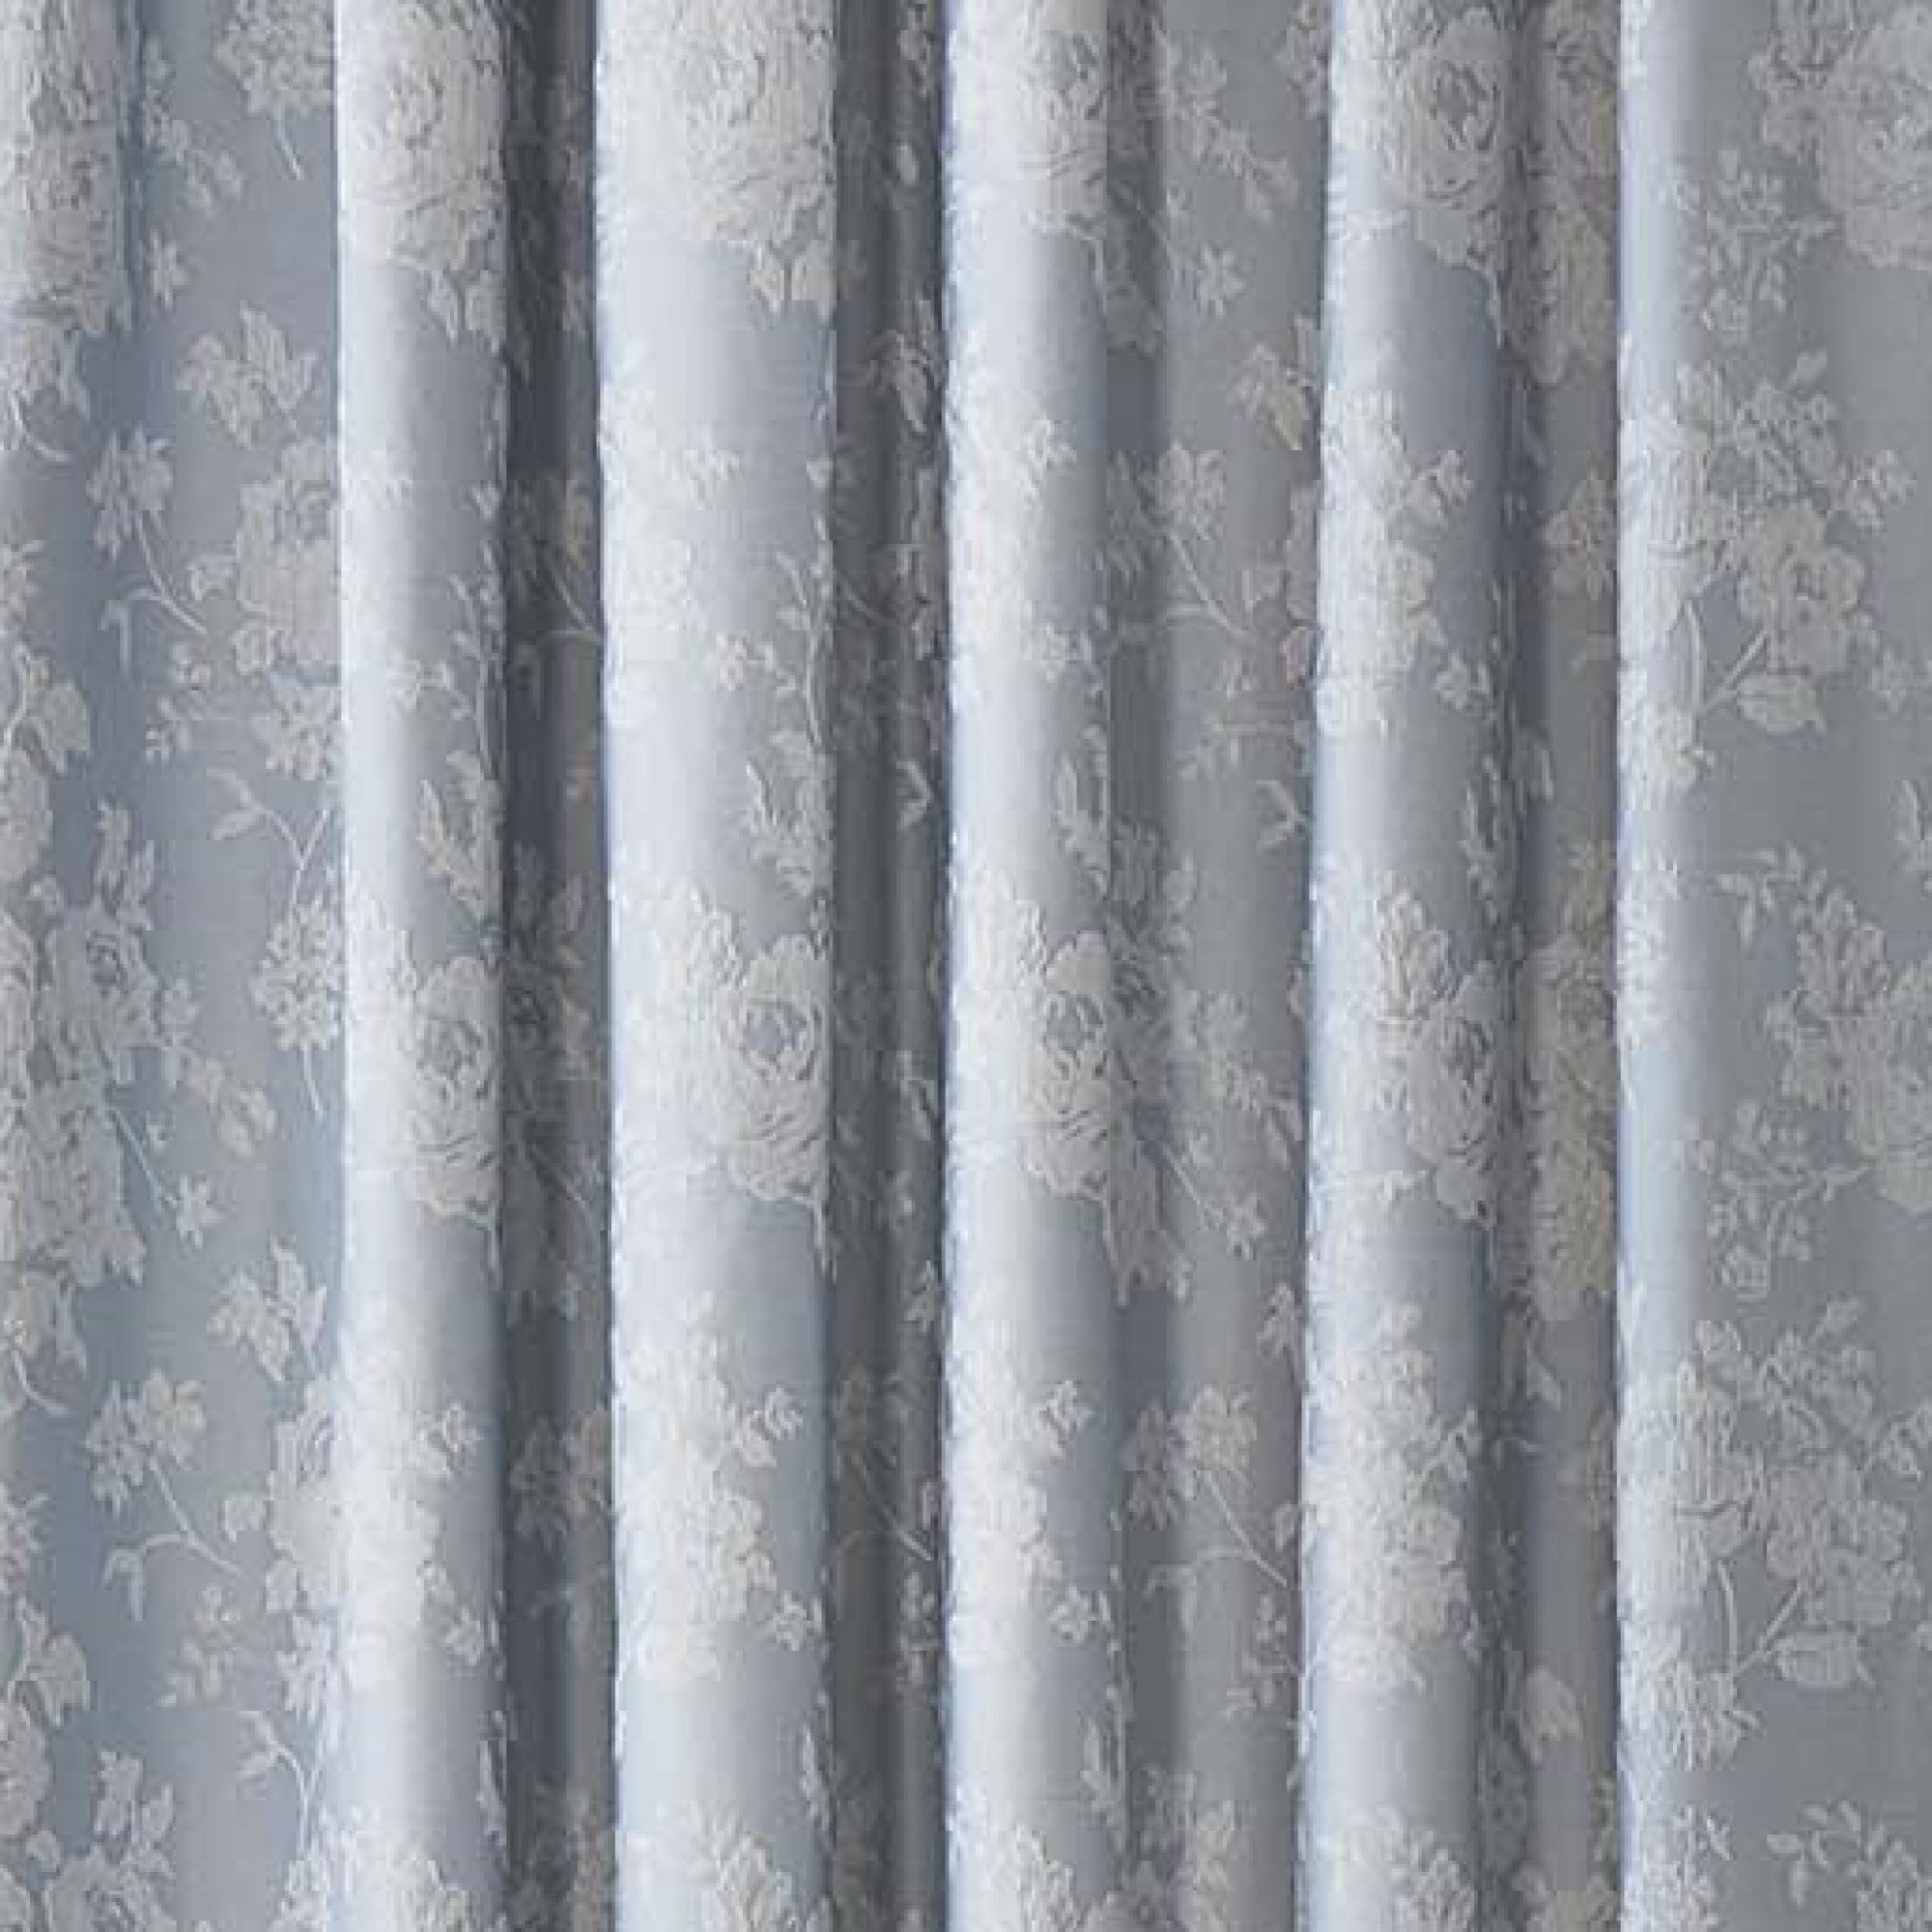 Pair of Pencil Pleat Curtains With Tie-Backs Imelda by Dreams & Drapes Woven in Duck Egg